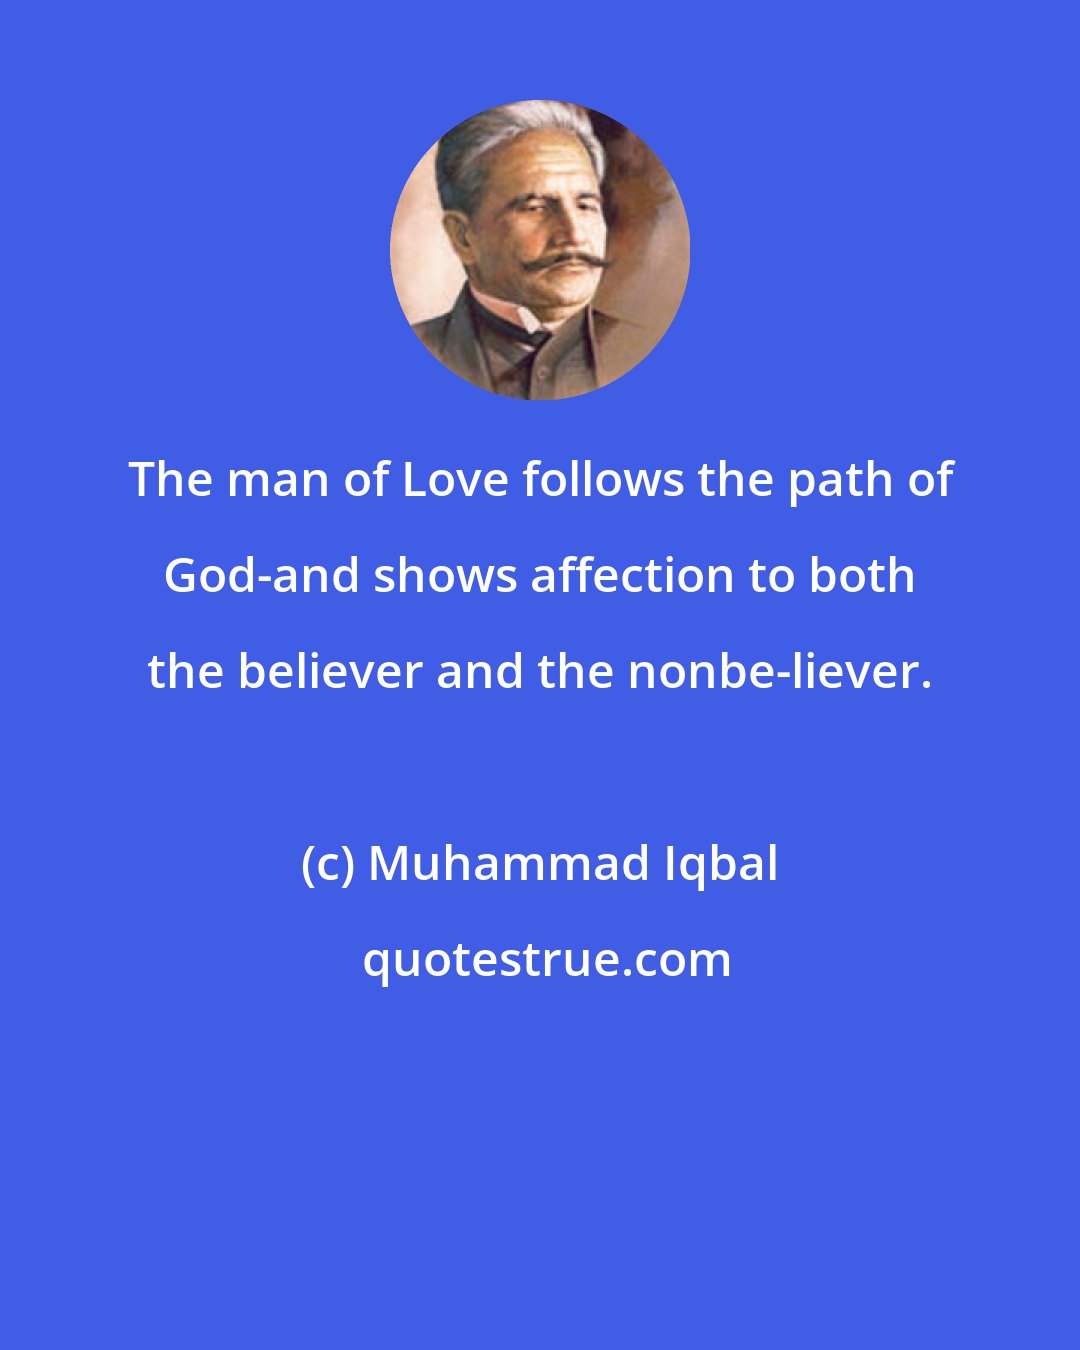 Muhammad Iqbal: The man of Love follows the path of God-and shows affection to both the believer and the nonbe-liever.